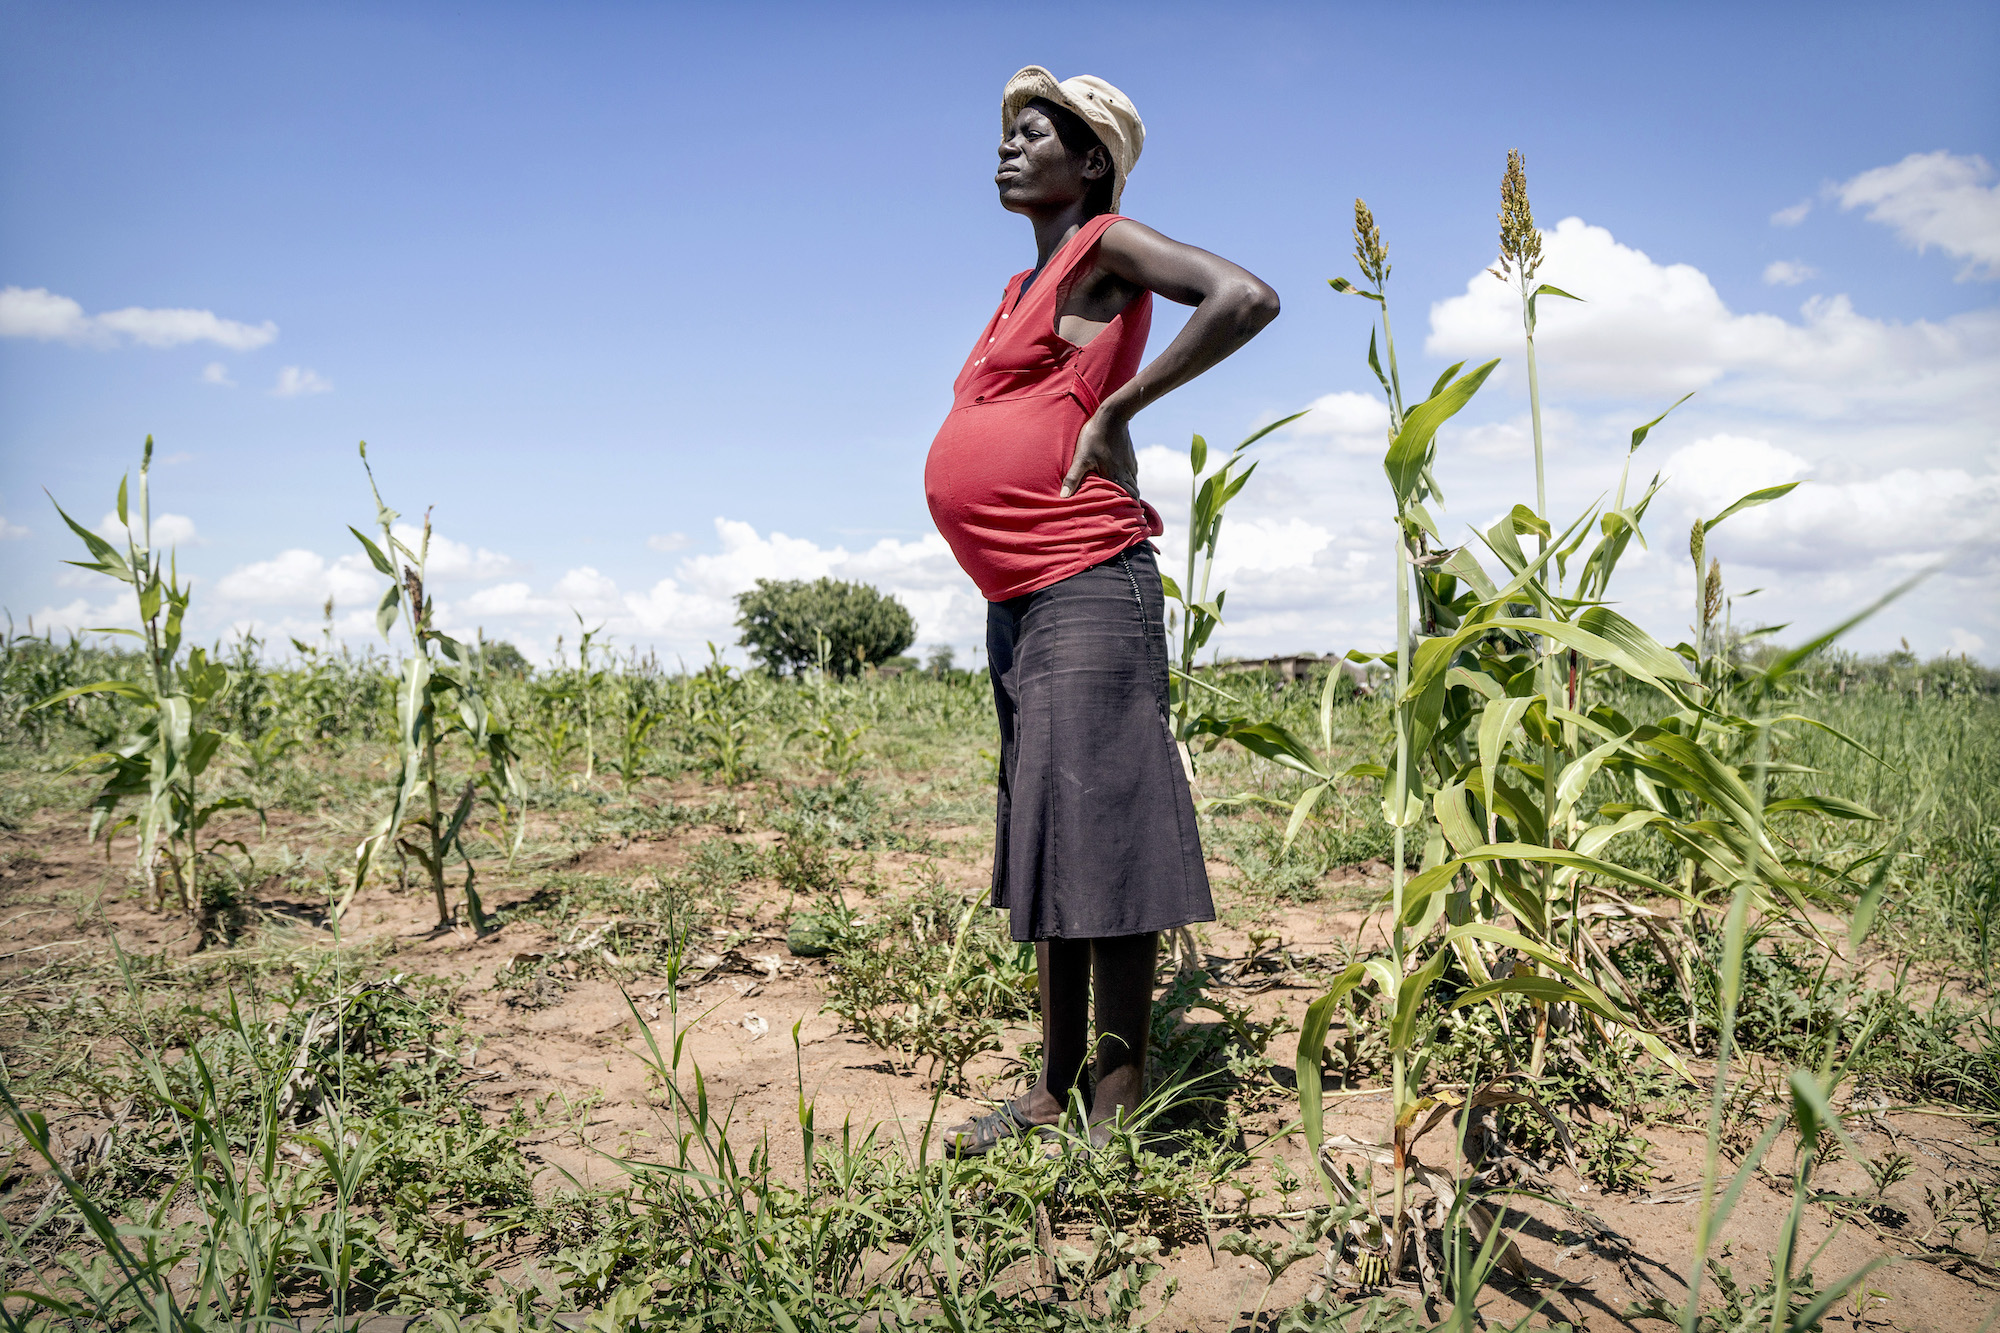 In the Matobo District in Zimbabwe, a pregnant woman stands in a field beside crops damaged by drought.